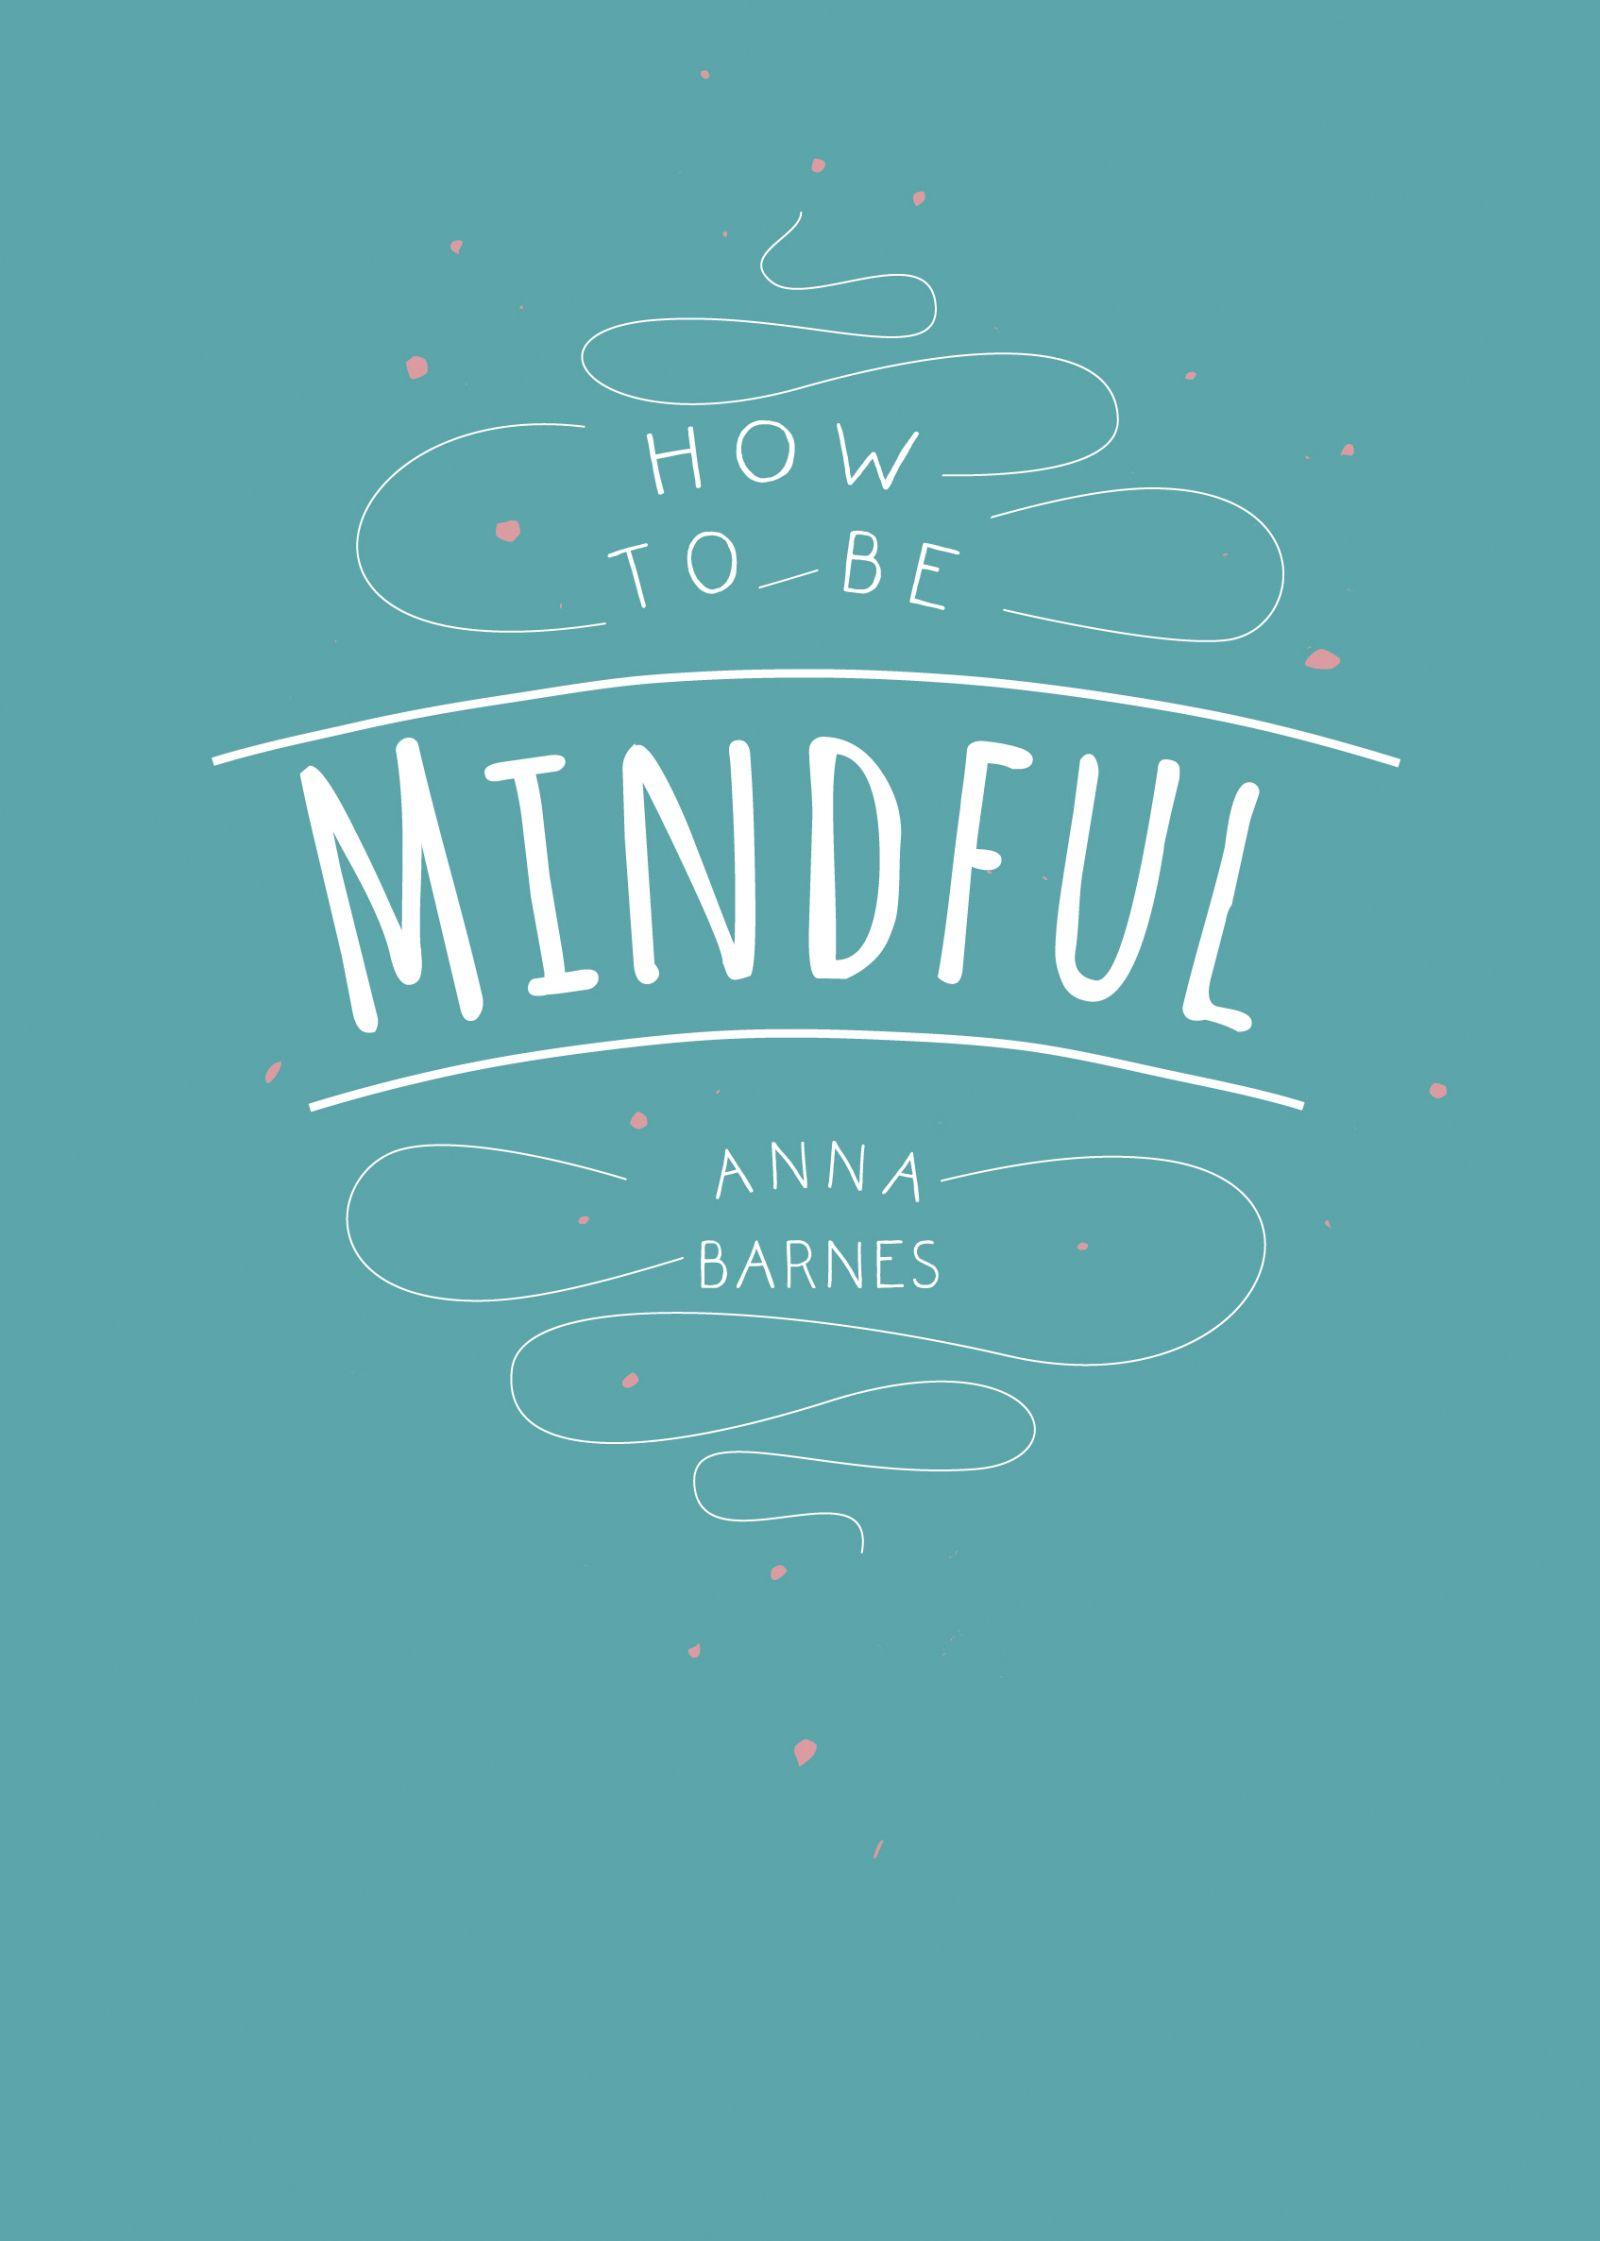 HOW TO BE MINDFUL